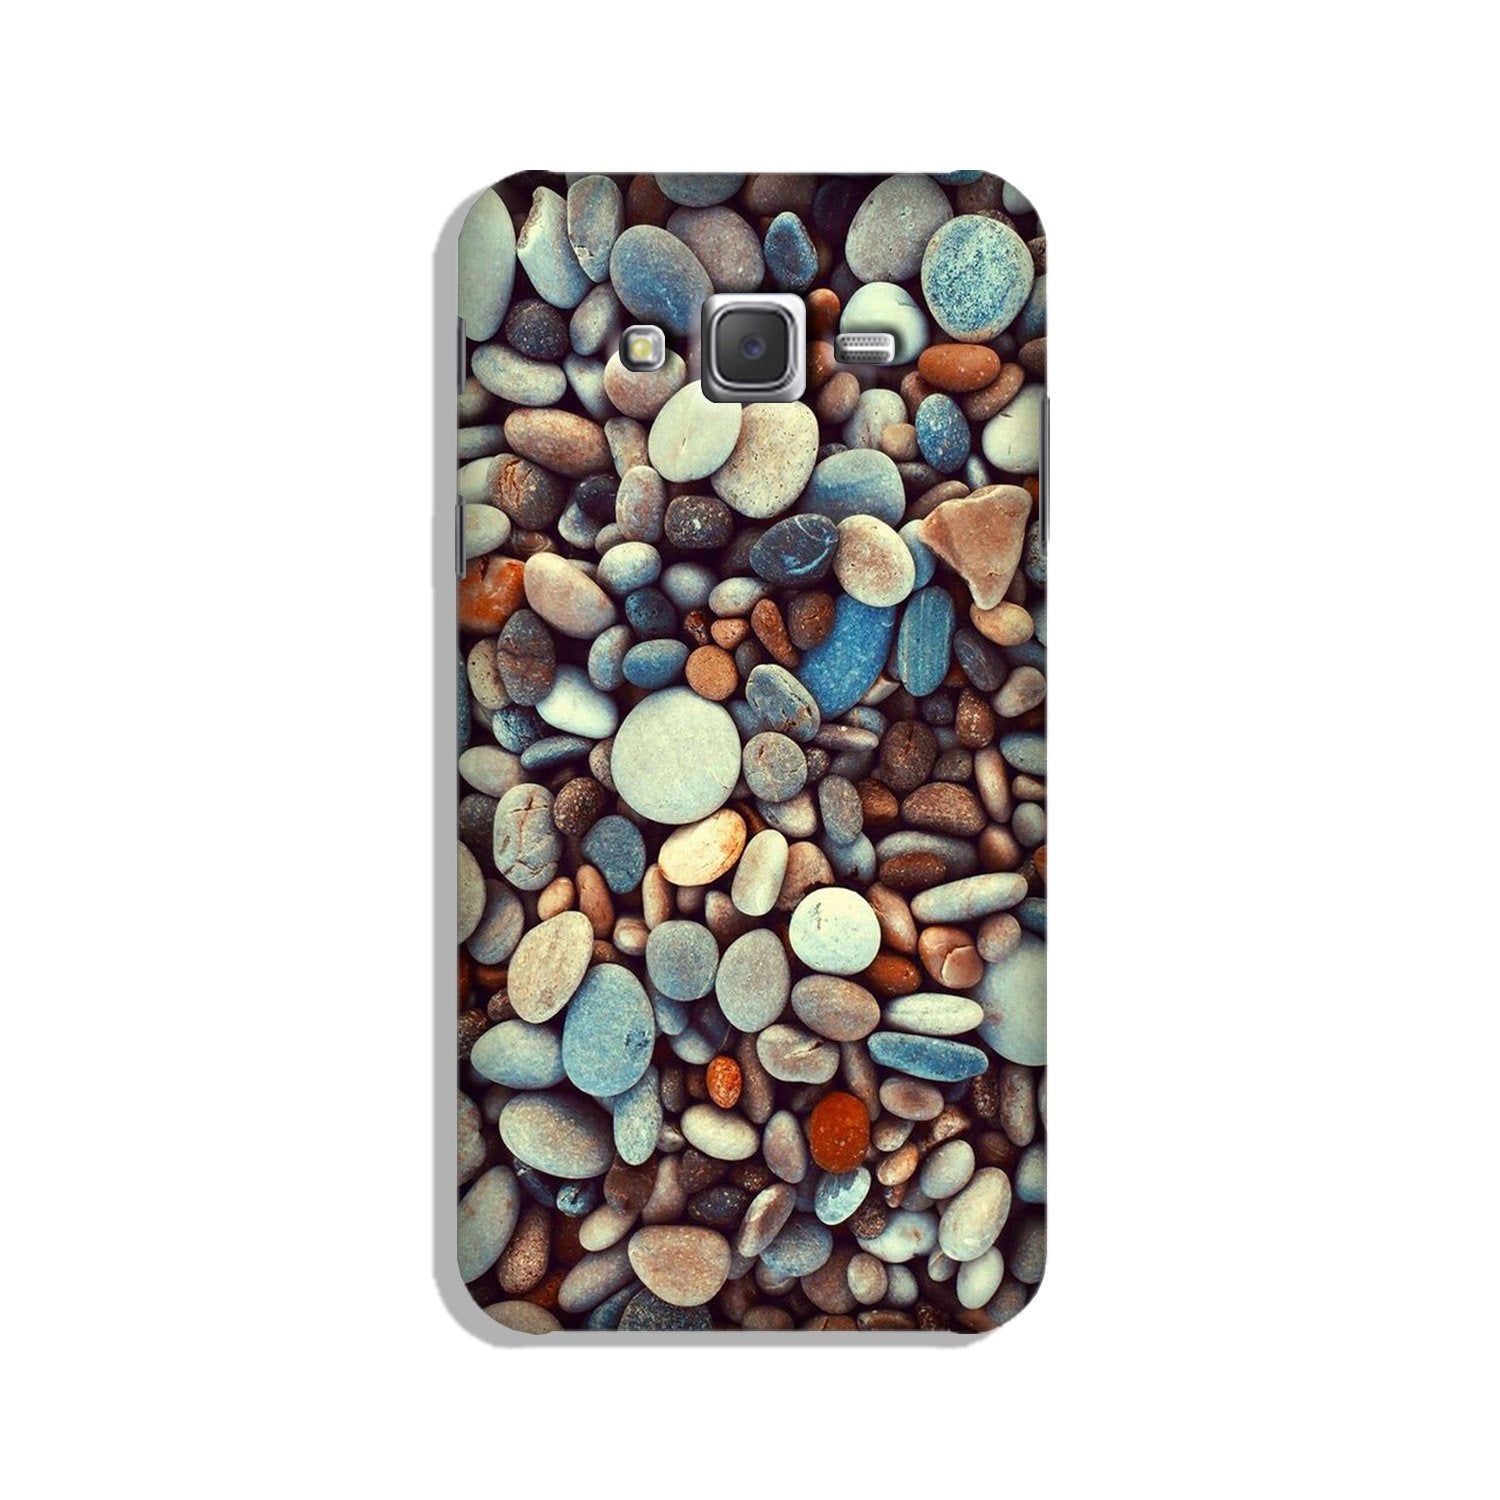 Pebbles Case for Galaxy J7 Nxt (Design - 205)